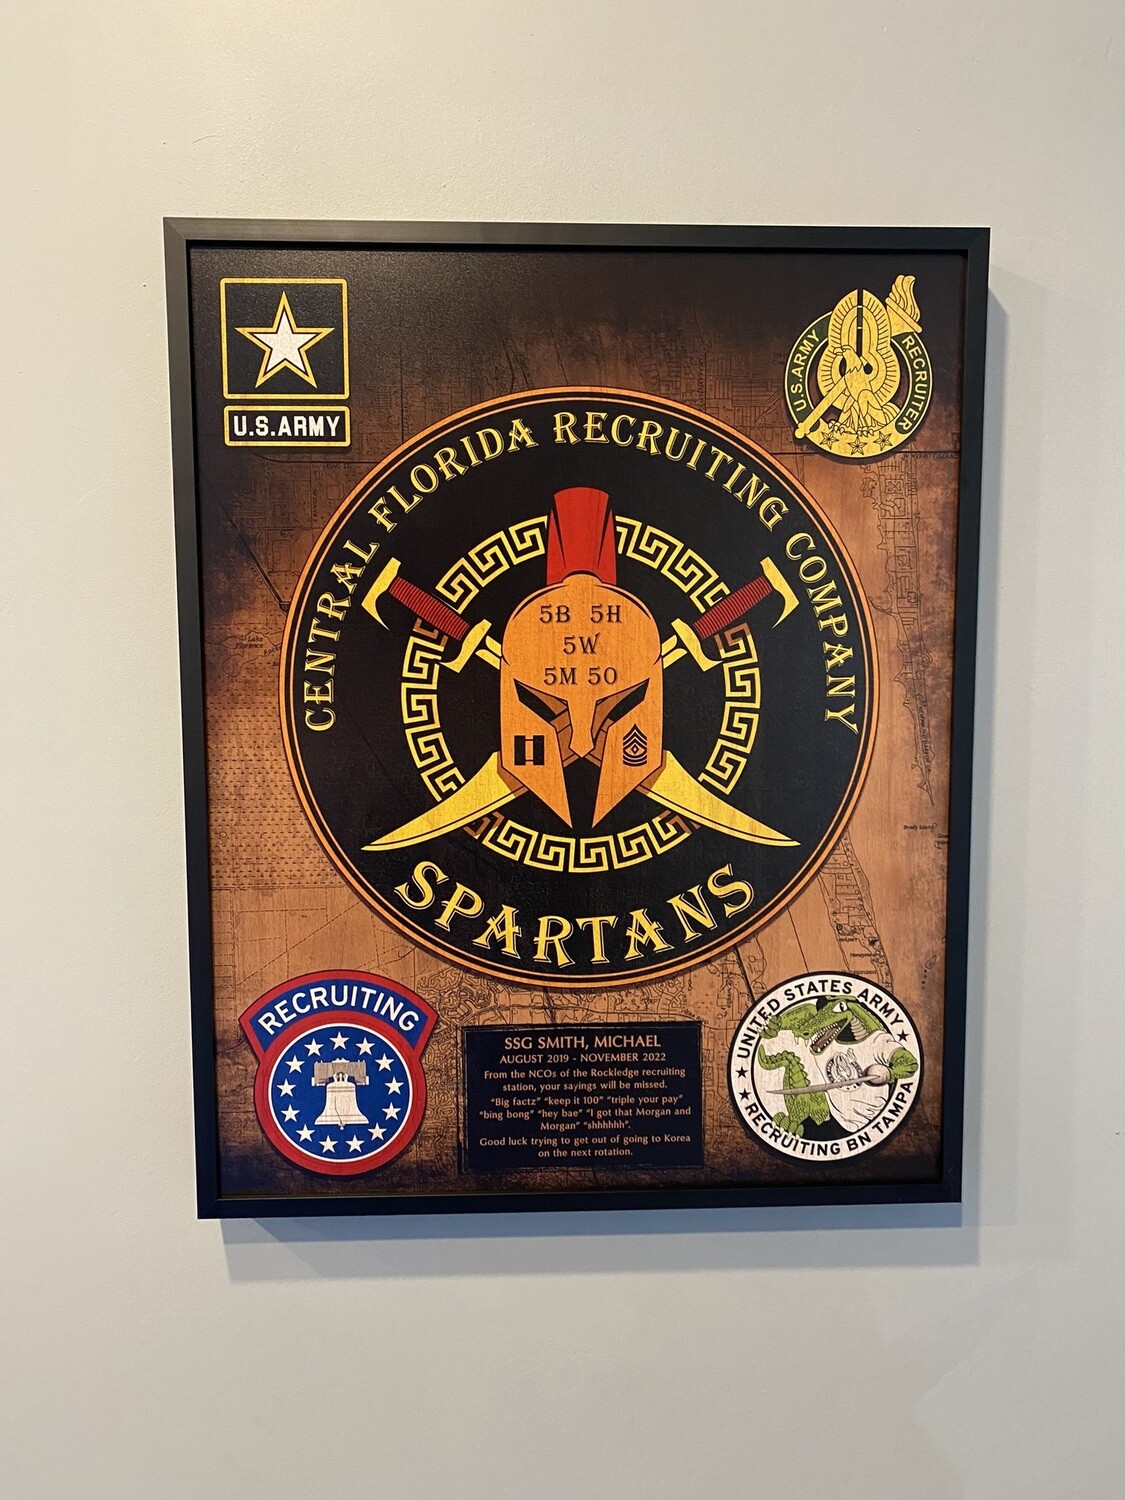 Central Florida Recruiting Co. "Spartans" Wood Plaque - 16.5"x20.5"